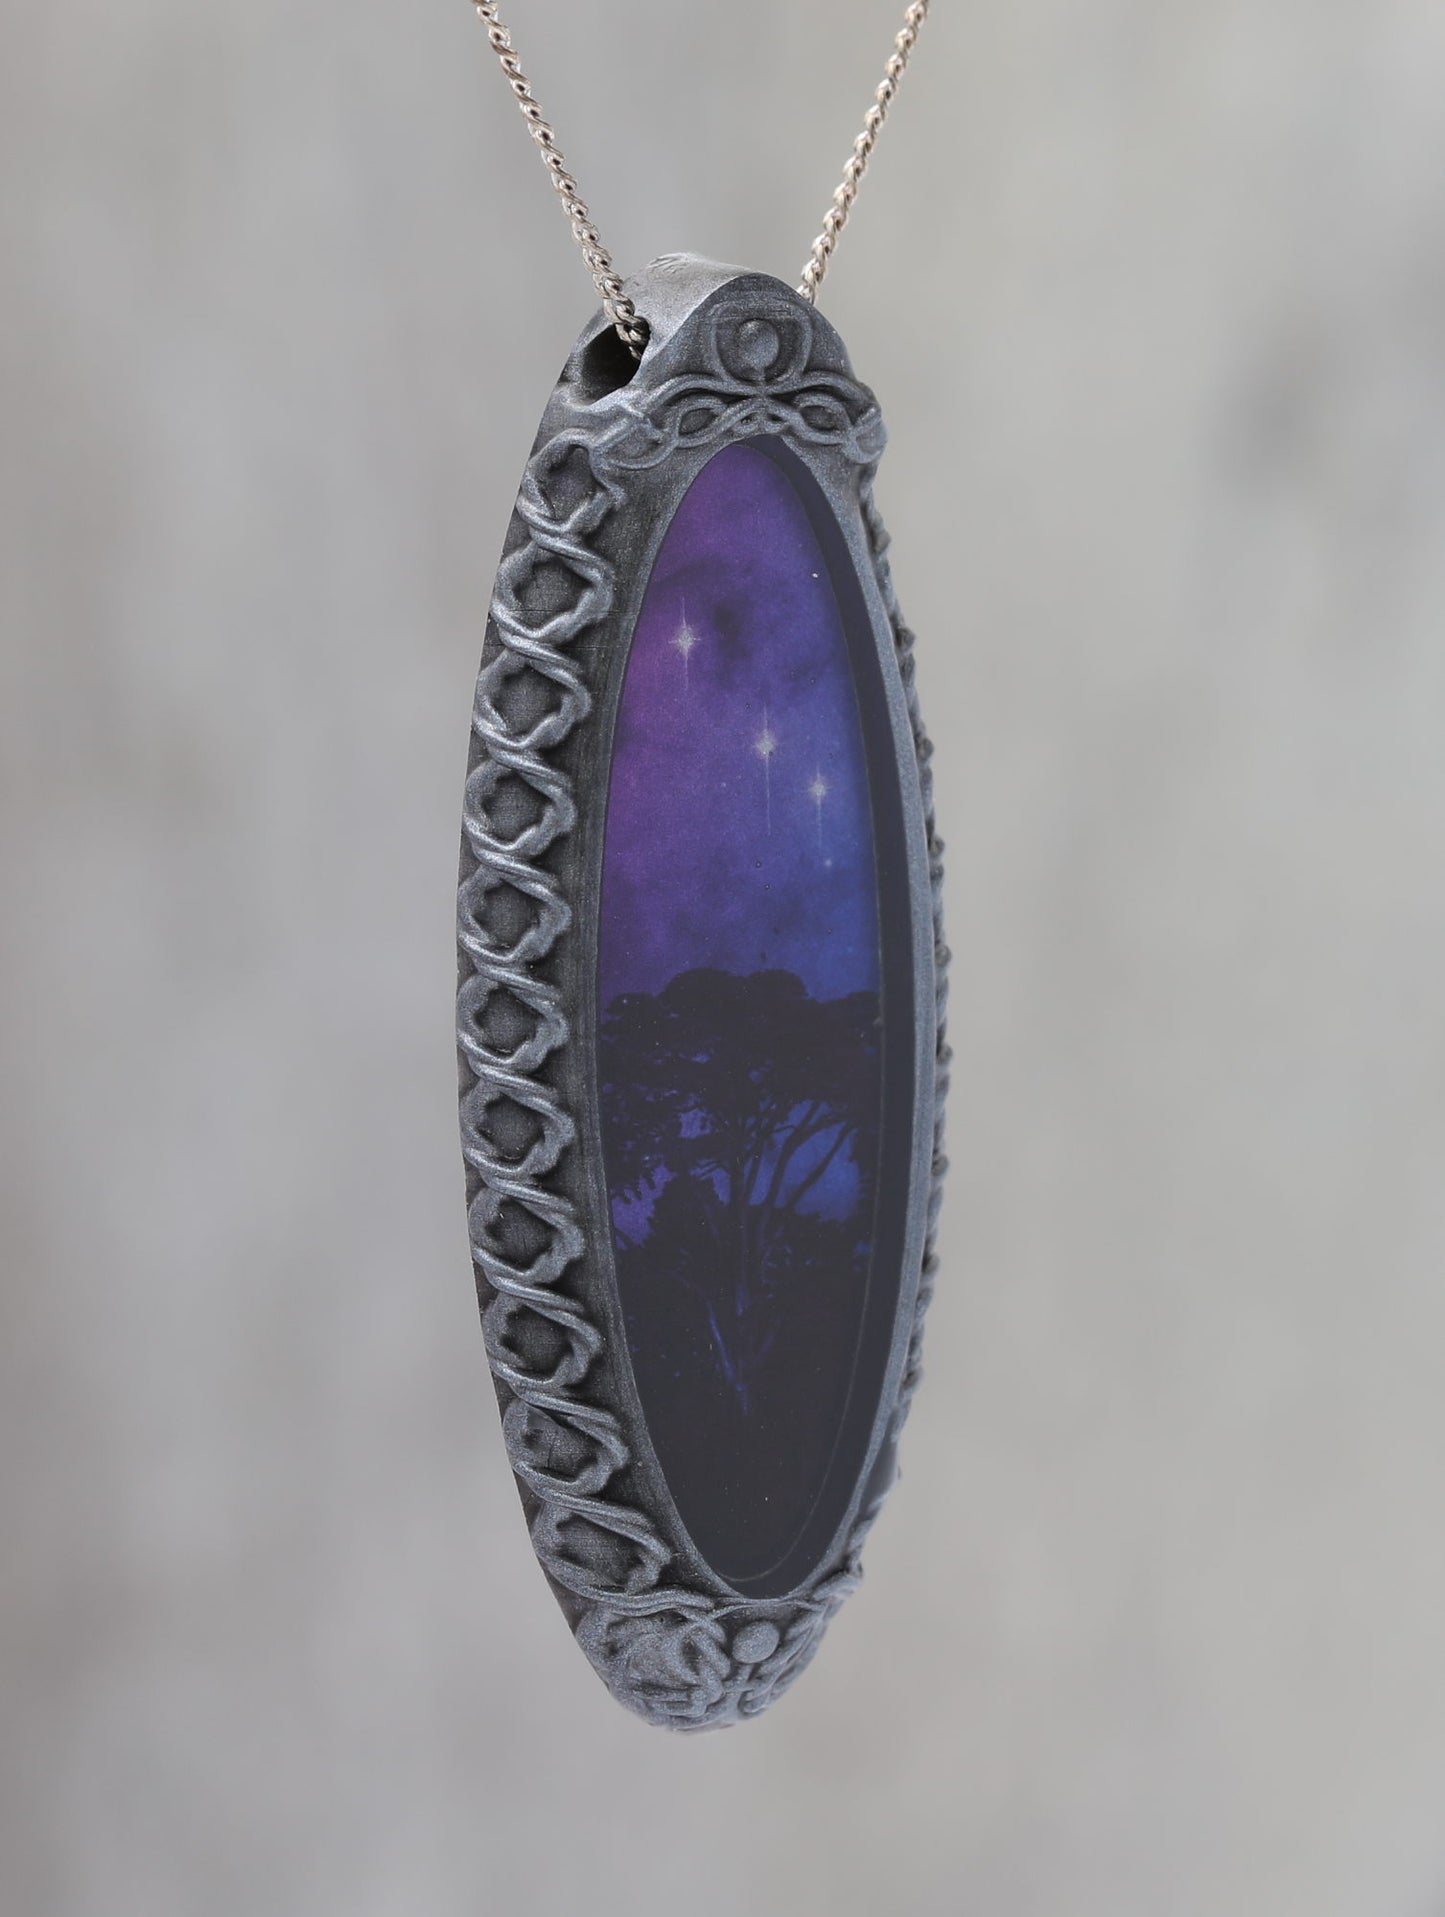 Trees Dreaming - Galaxy Pendant with Celtic Knotwork  and made with a photo of a tree and the Carina Nebula!